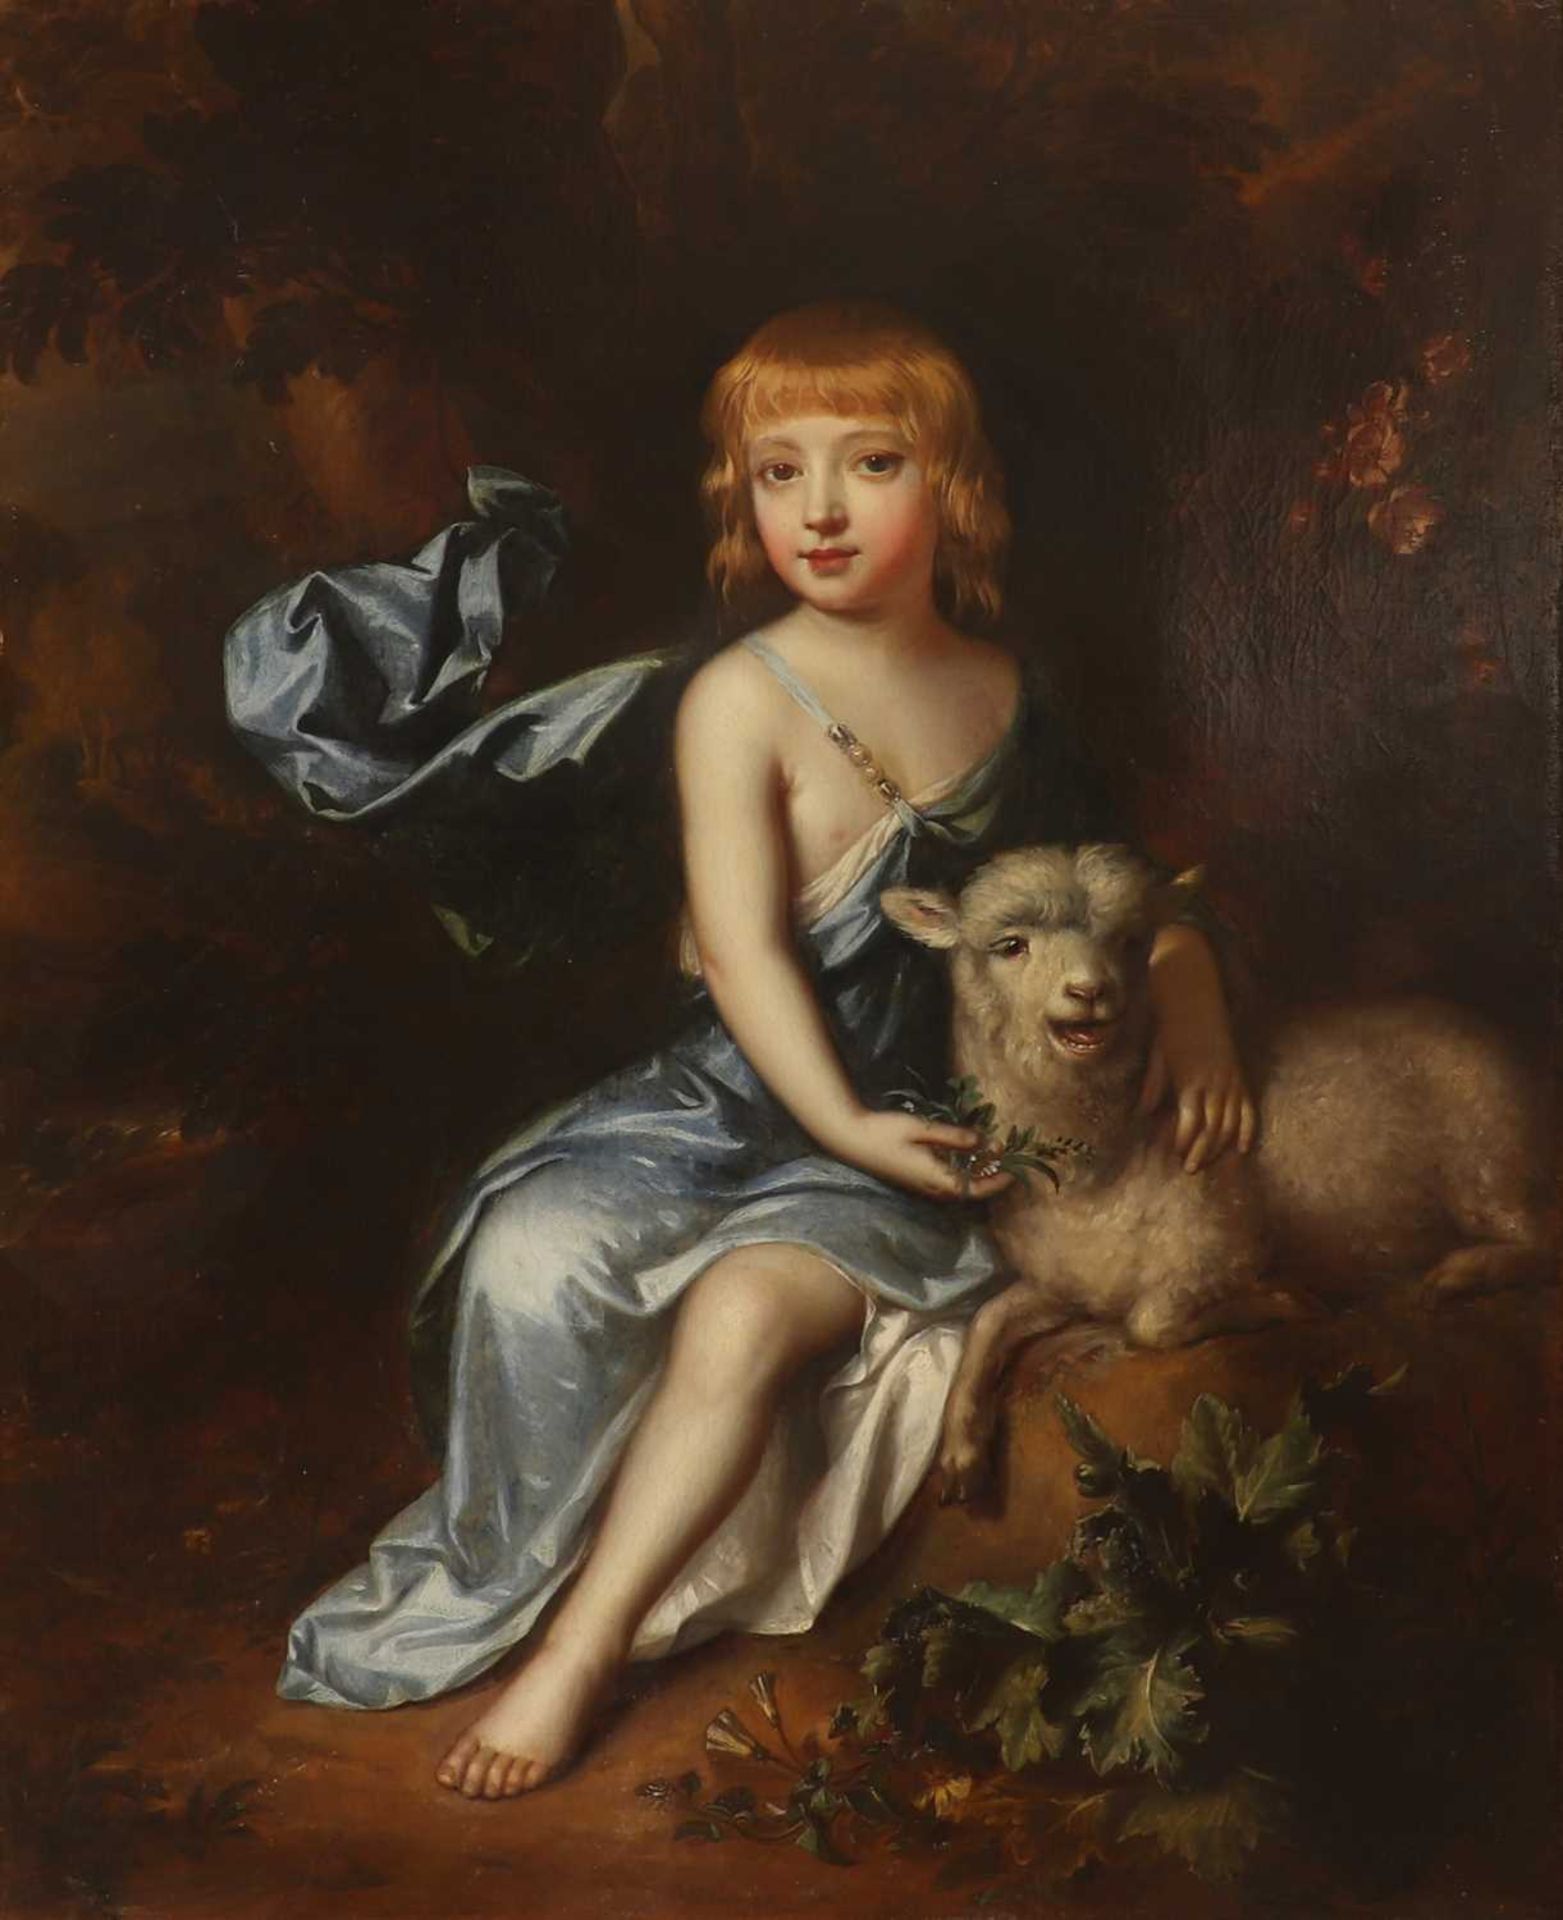 Attributed to John Closterman (1660-1711)